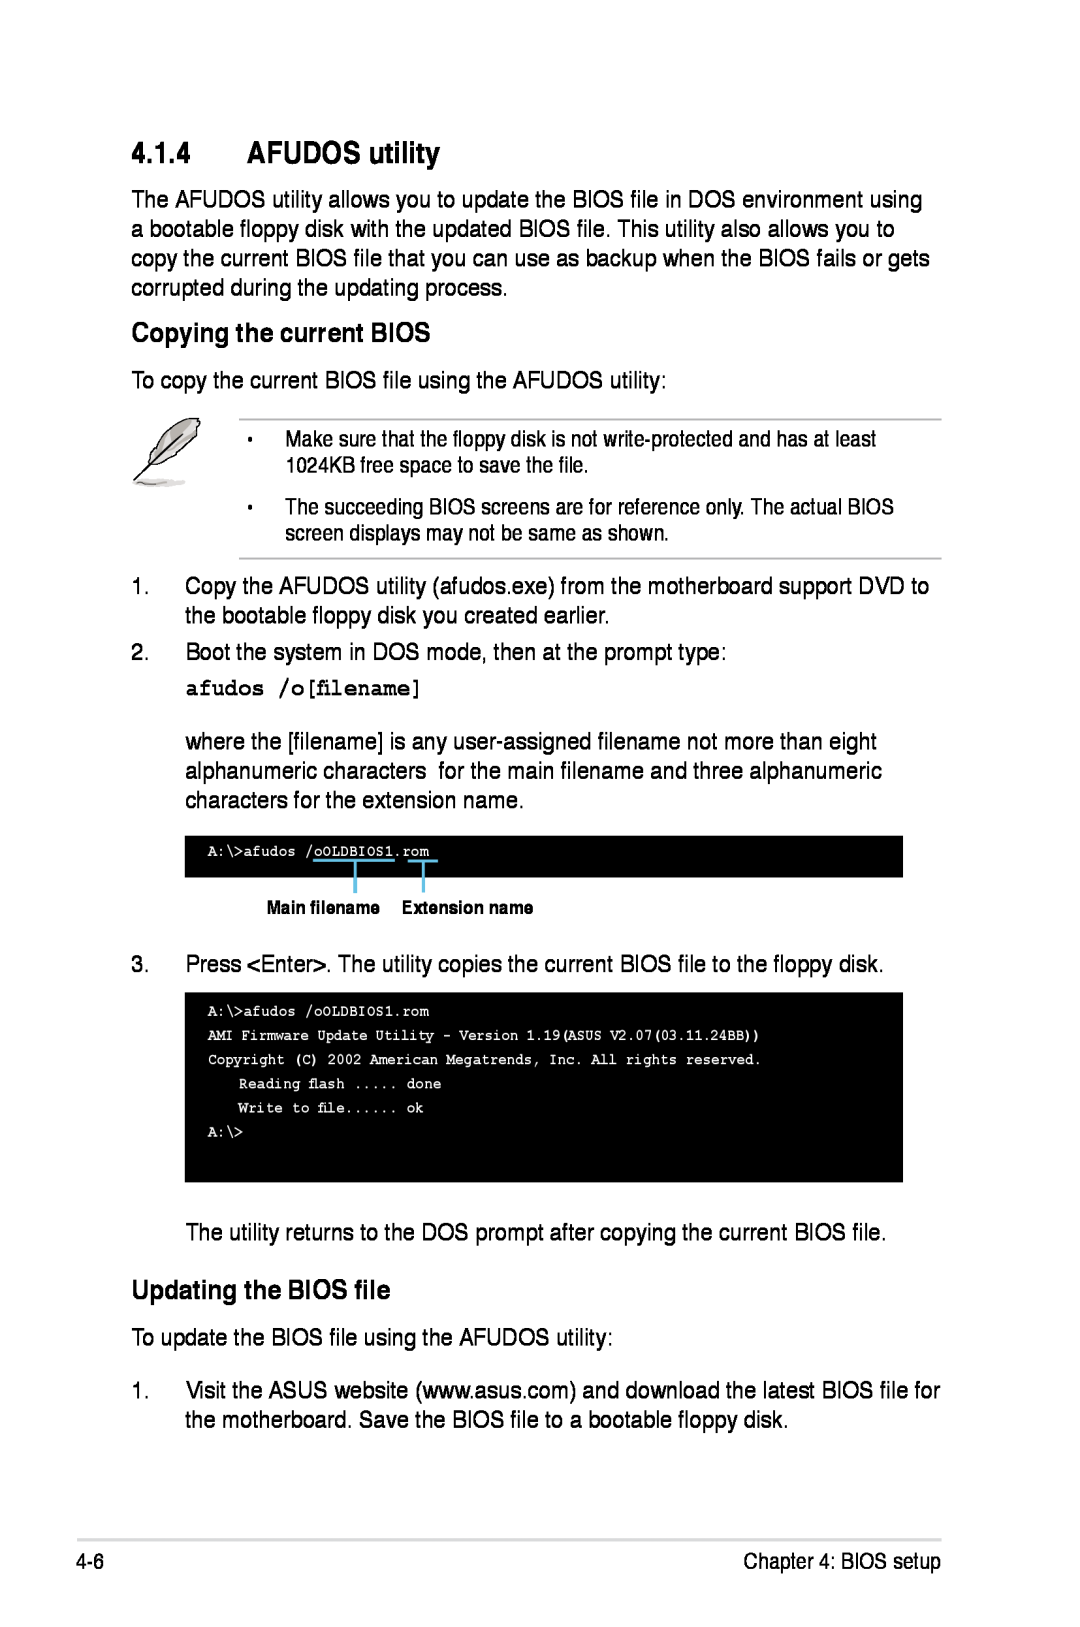 Asus Z7S WS manual AFUDOS utility, Copying the current BIOS, Updating the BIOS file 